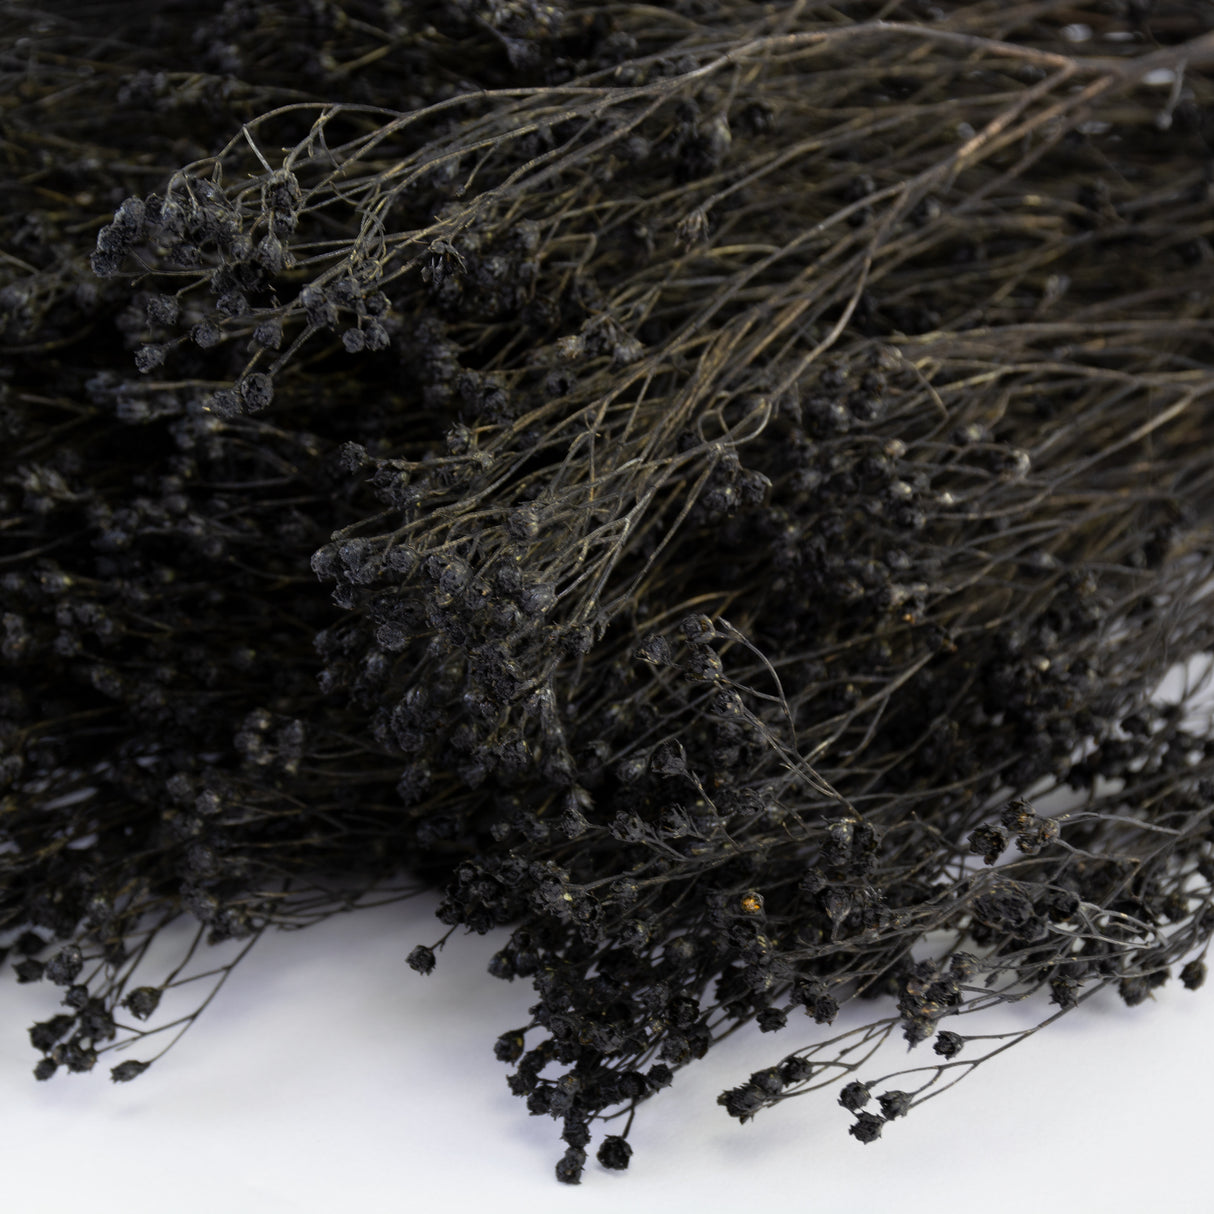 This image shows a bunch of black broom bloom against a white background